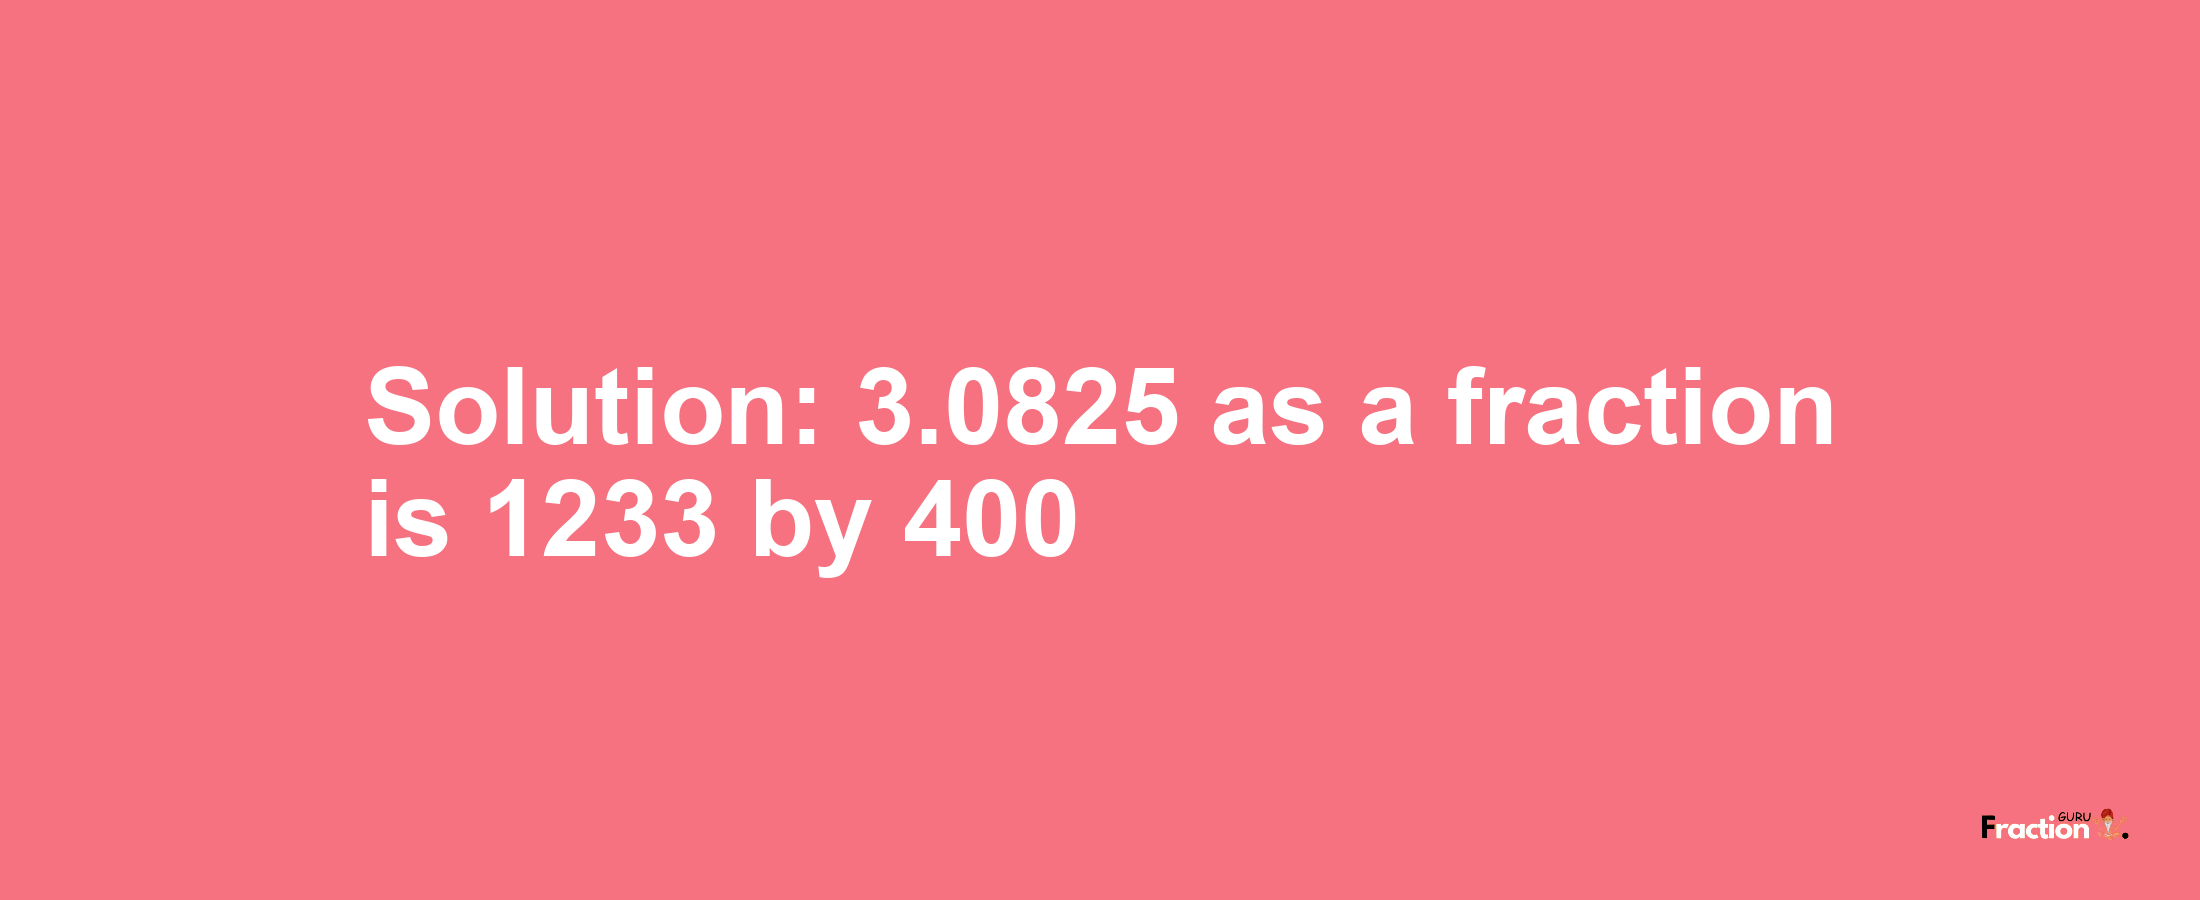 Solution:3.0825 as a fraction is 1233/400